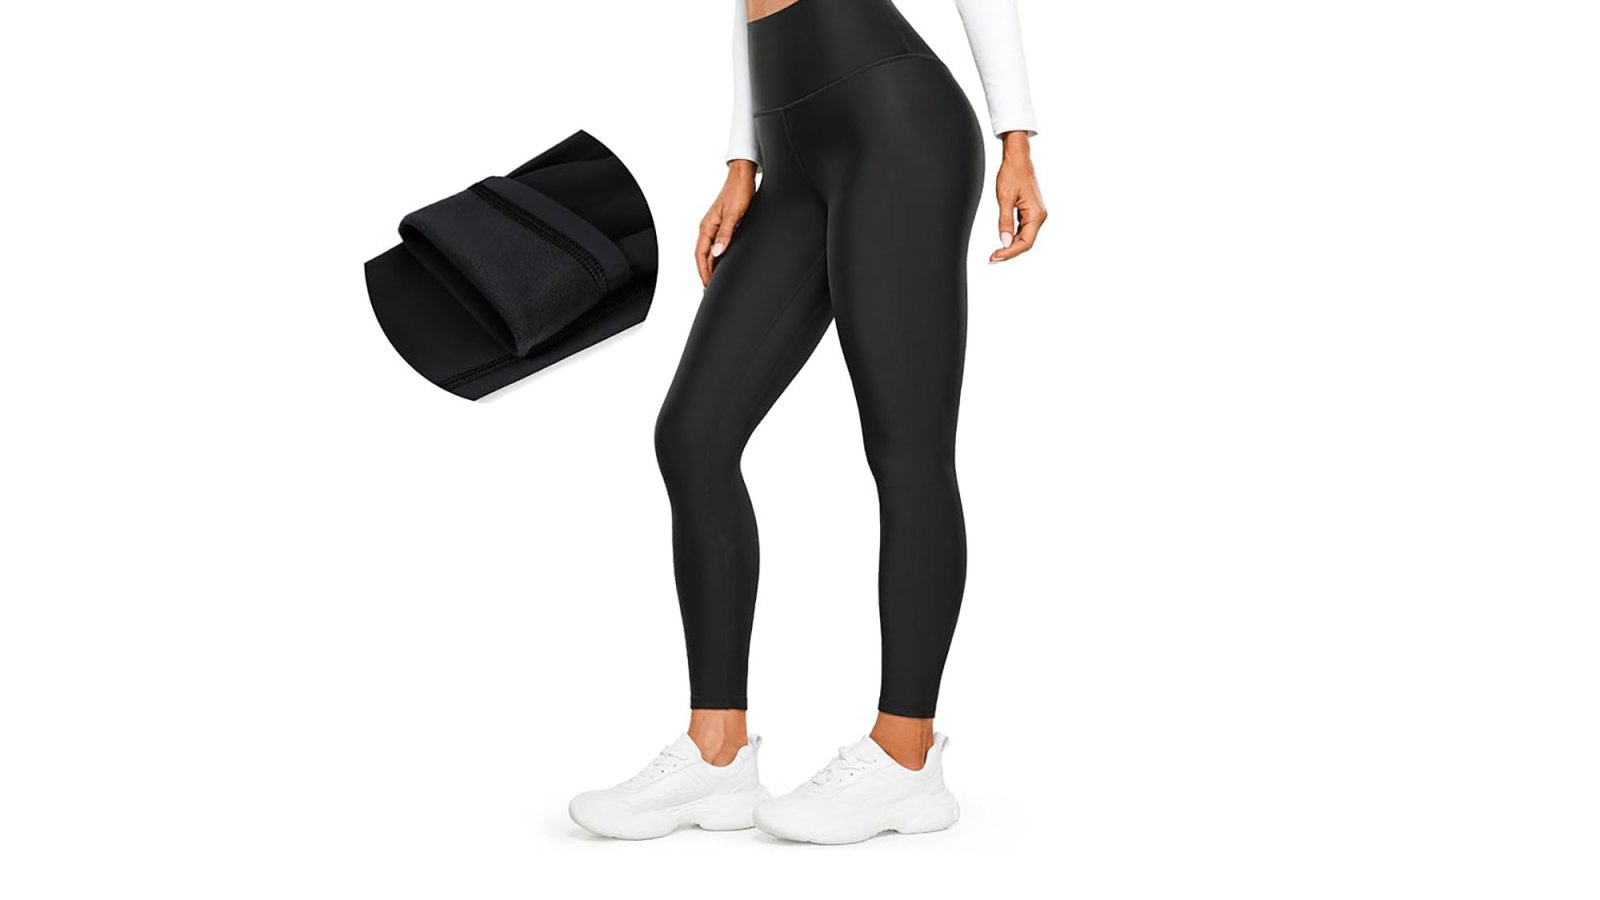 Must Have Leggings For Cold Weather x CRZ Yoga, Everything Fleece